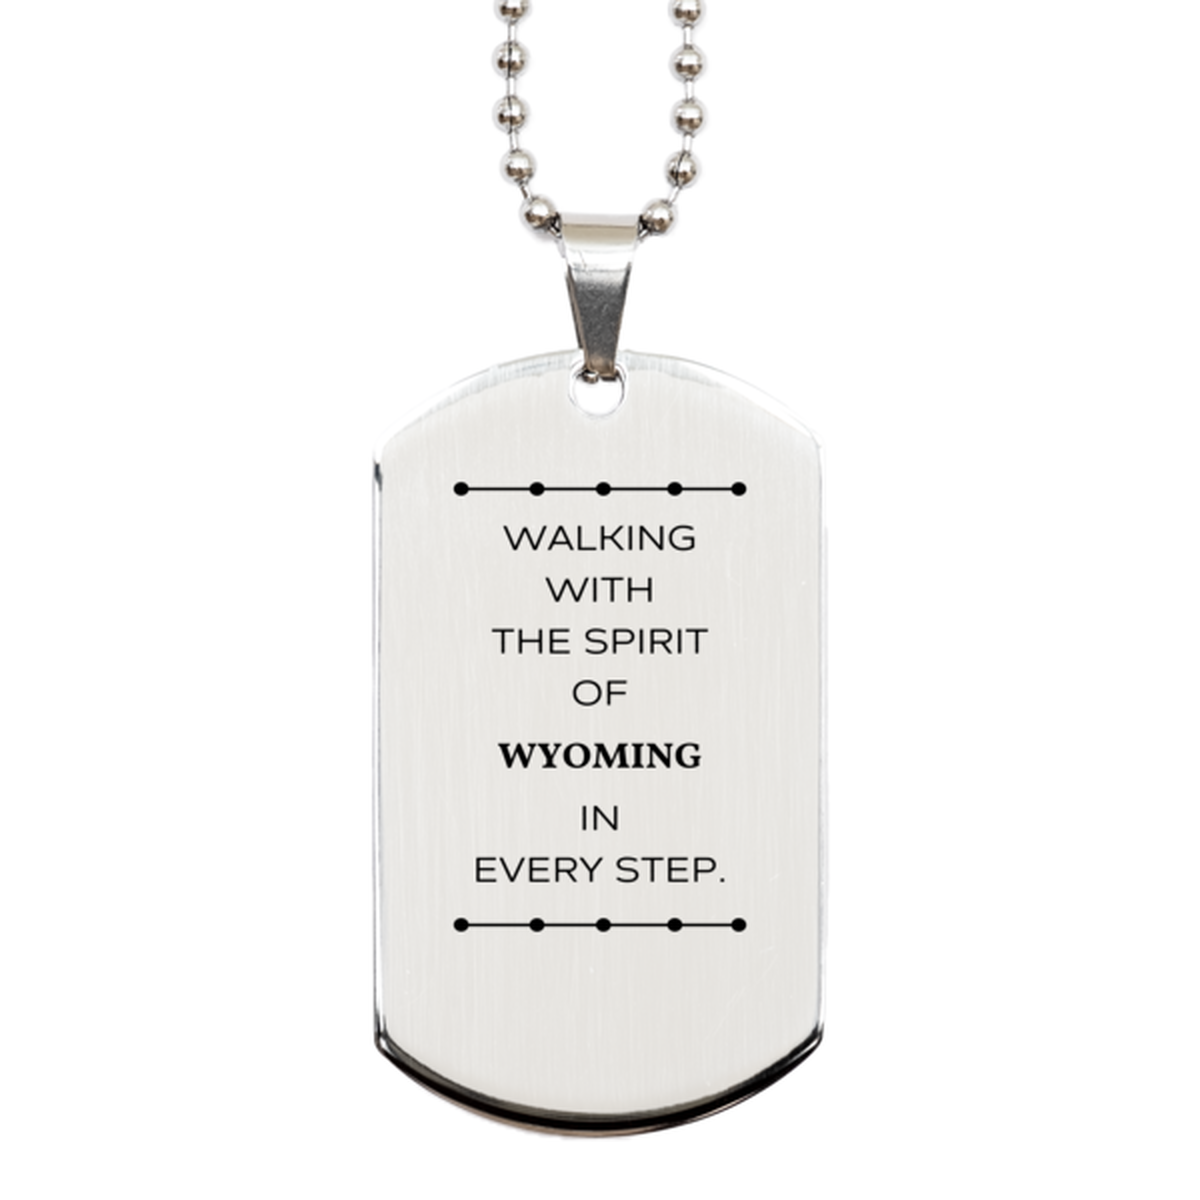 Wyoming Gifts, Walking with the spirit, Love Wyoming Birthday Christmas Silver Dog Tag For Wyoming People, Men, Women, Friends